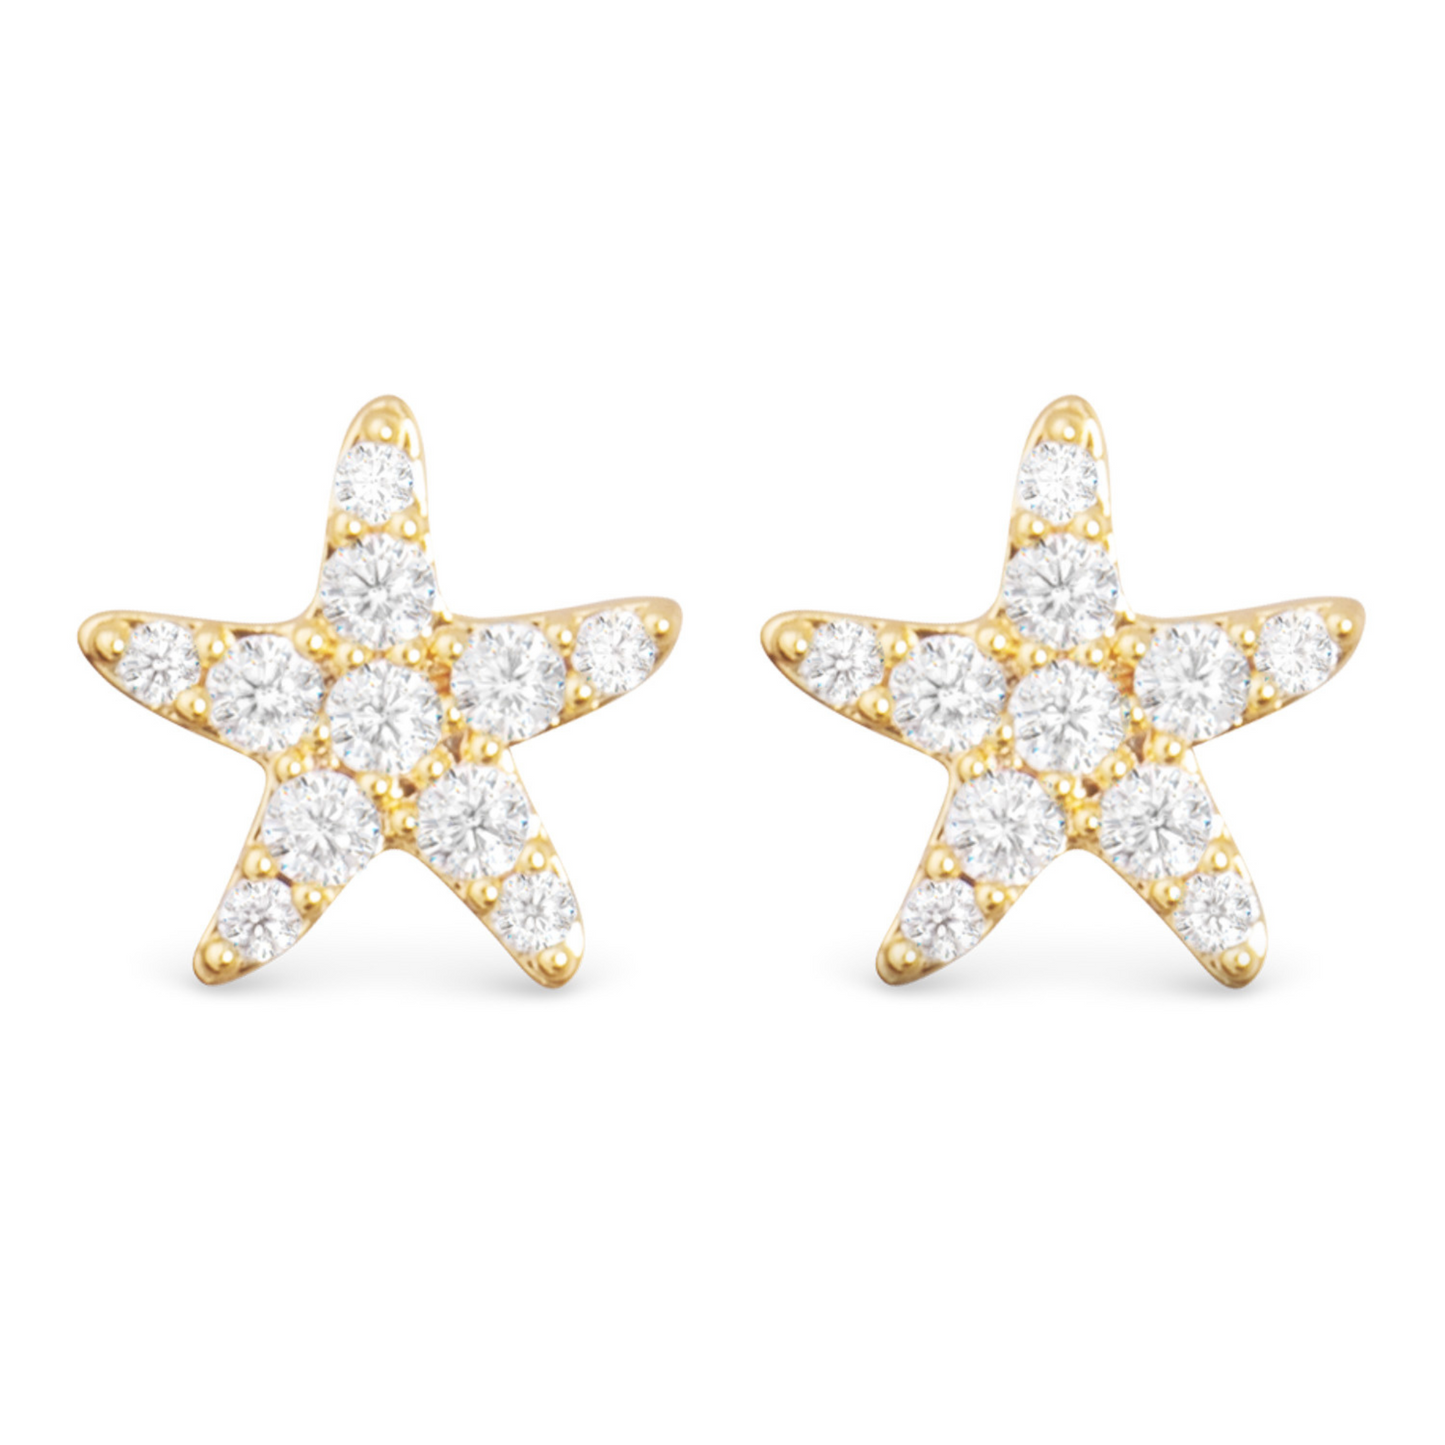 Get a touch of elegance with our Starfish Stud Earrings. Crafted in gold and adorned with sparkling rhinestones, these stud earrings feature a unique and playful starfish shape. Perfect for both casual and formal occasions, these earrings will add a touch of sophistication to any outfit.